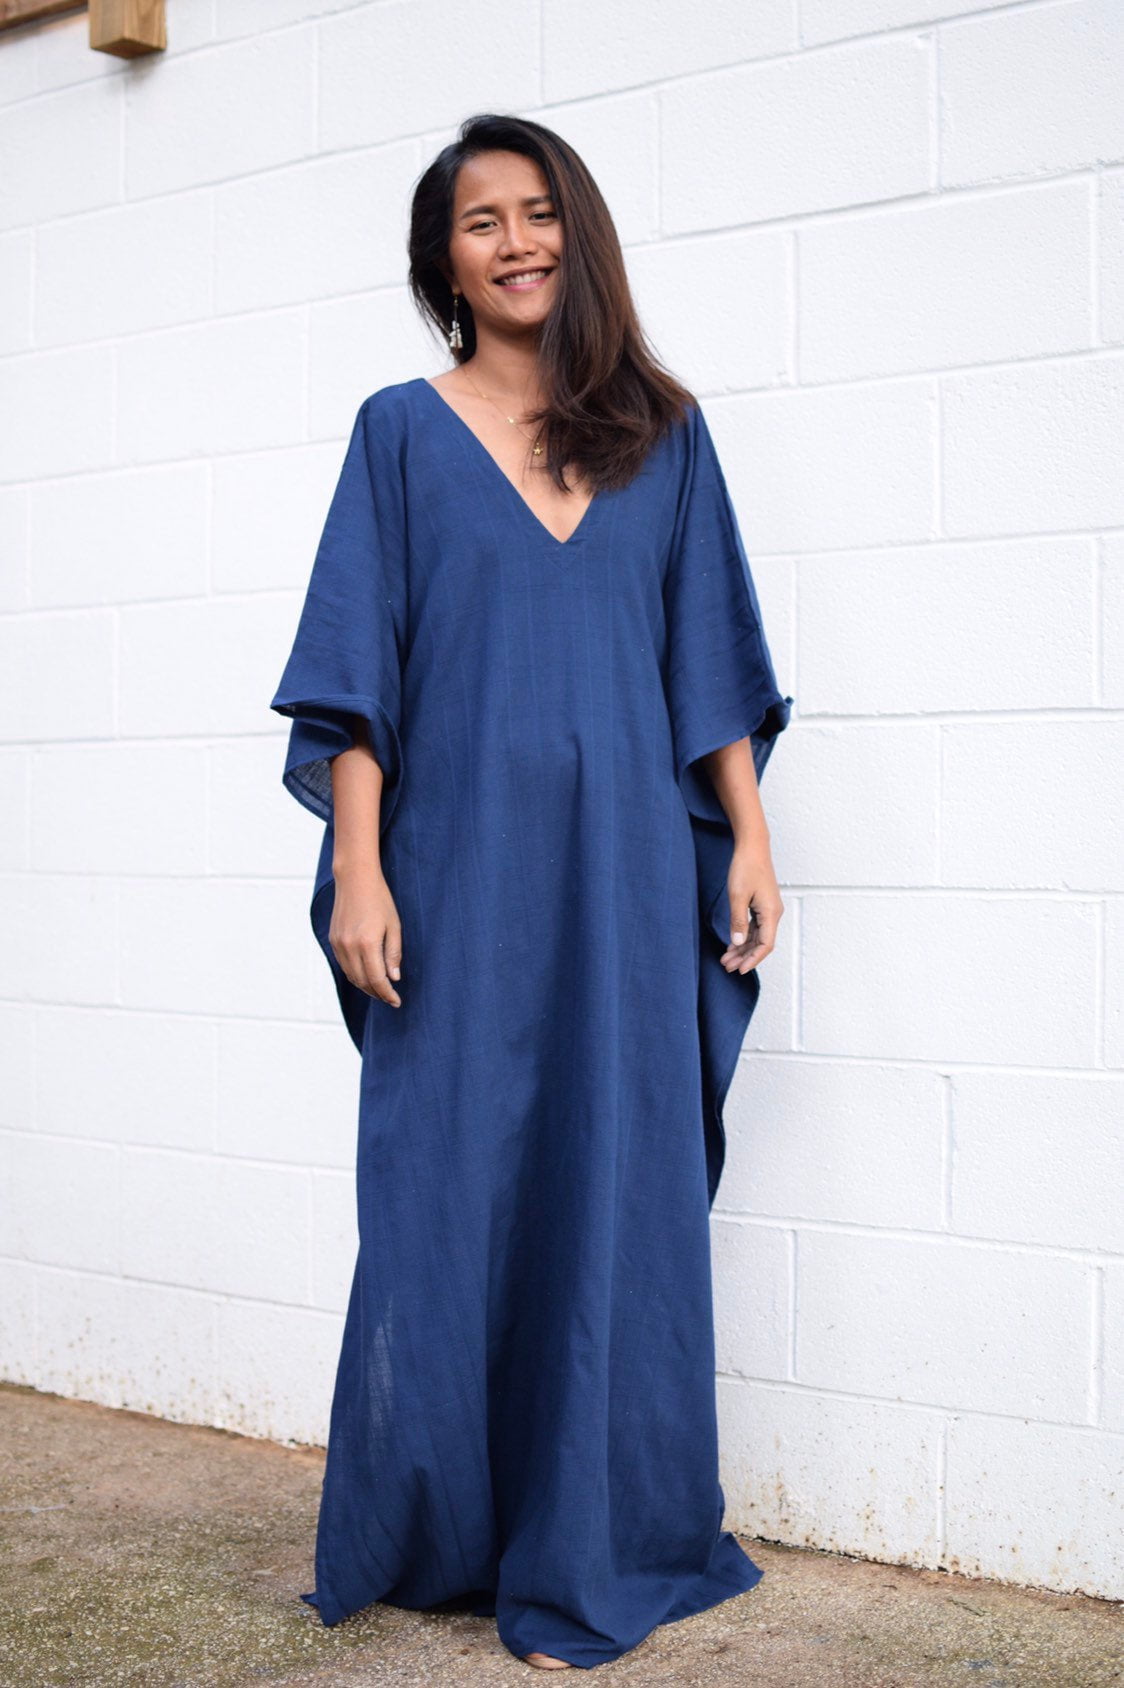 MALA handworks Evelyn Kaftan in Navy Blue and Semi Ribbed Cotton